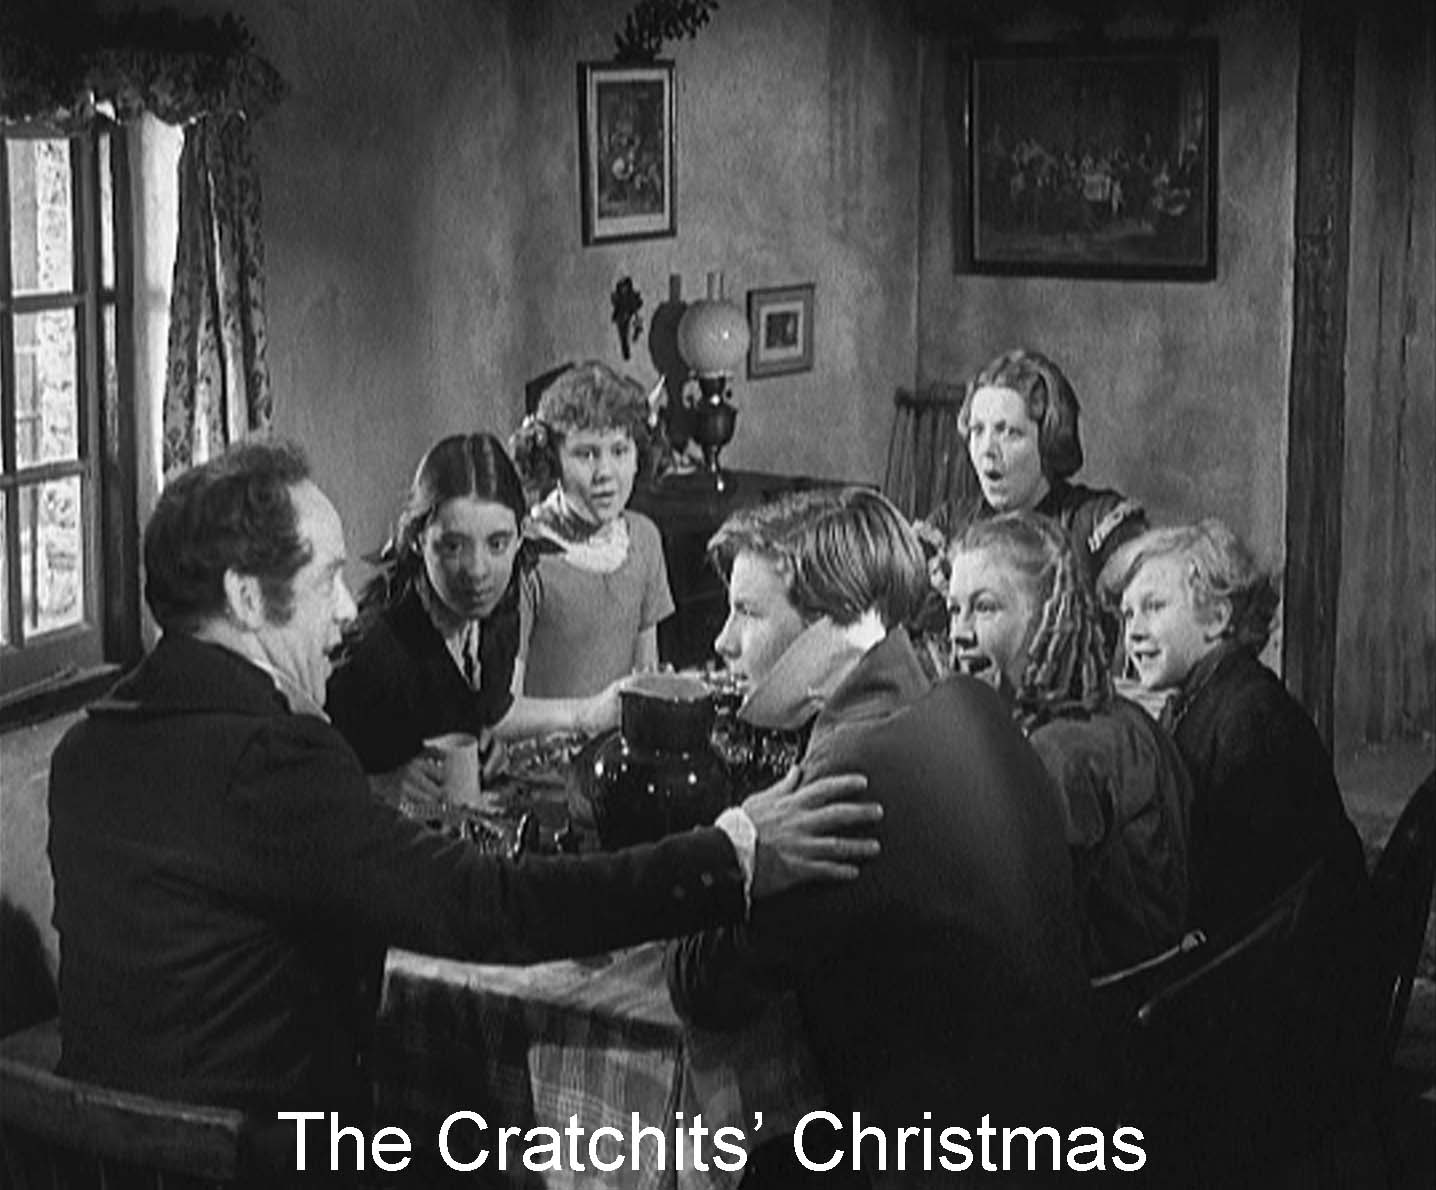 The Cratchits' Christmas